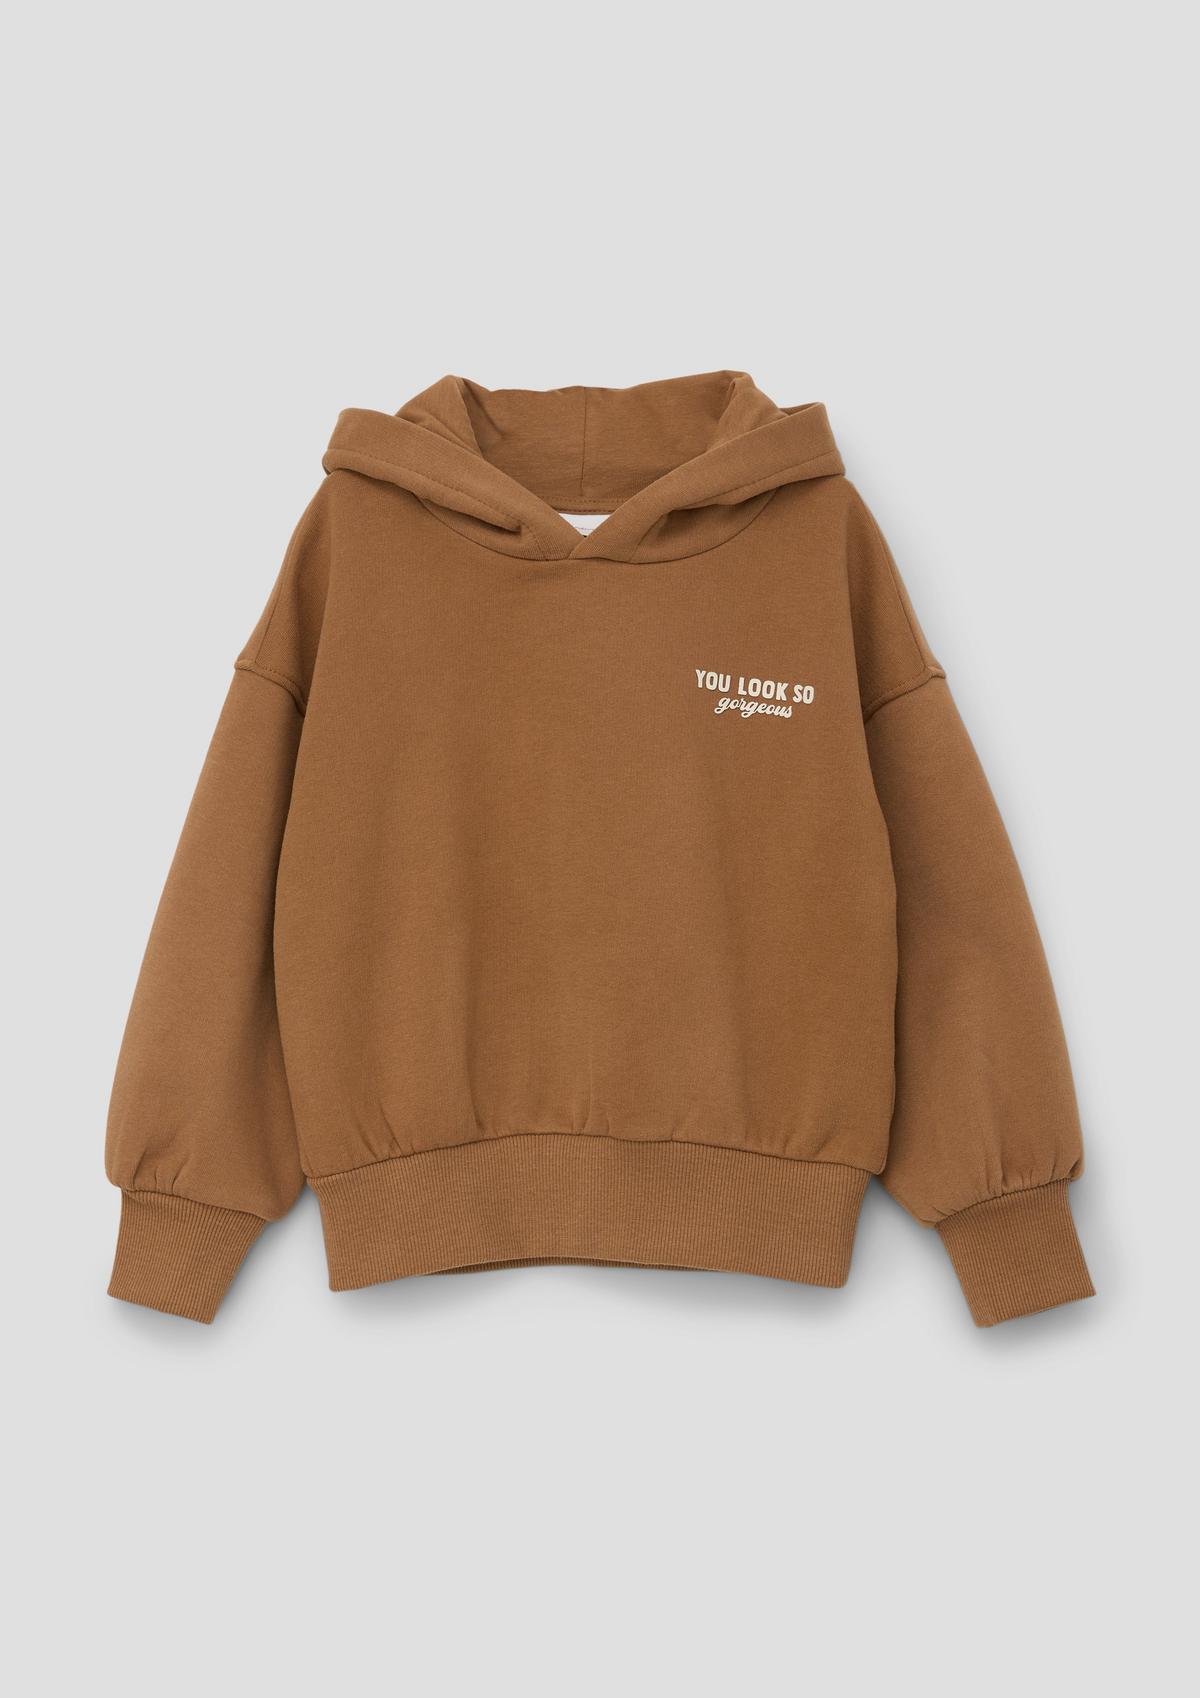 with Hooded - a pink reverse sweatshirt soft